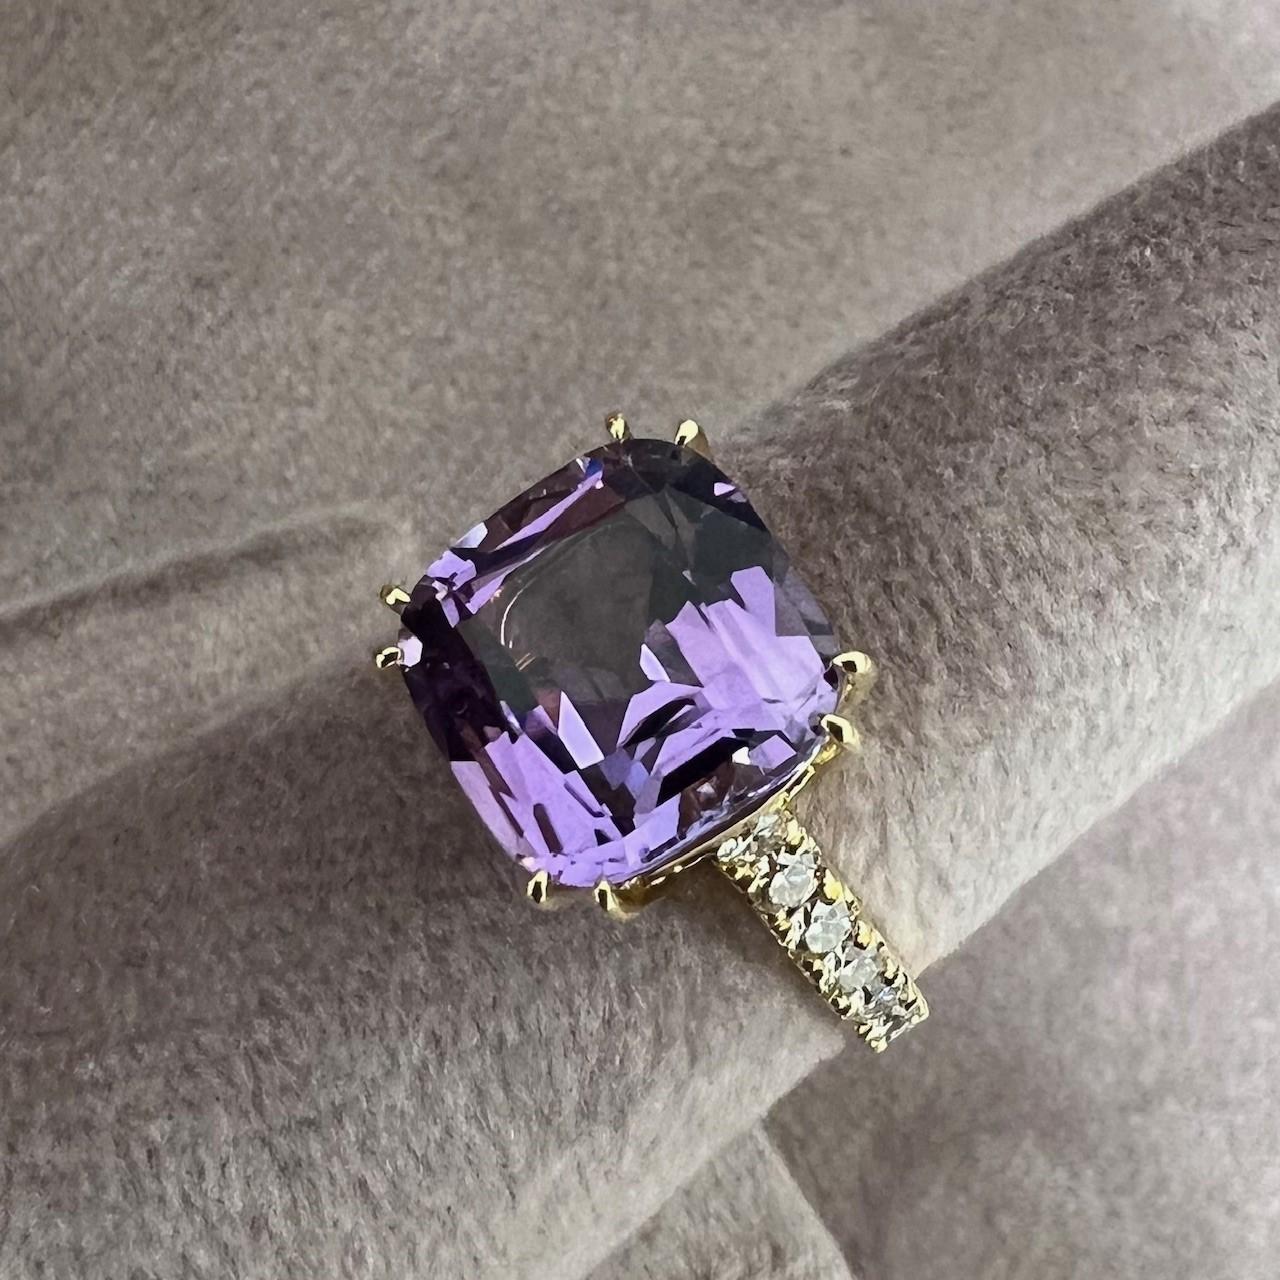 Created in 18 karat yellow gold
Amethyst 4 carats approx.
Diamonds 0.80 carat approx.
Ring size US 6.5, can be sized
Limited edition


About the Designers ~ Dharmesh & Namrata

Drawing inspiration from little things, Dharmesh & Namrata Kothari have